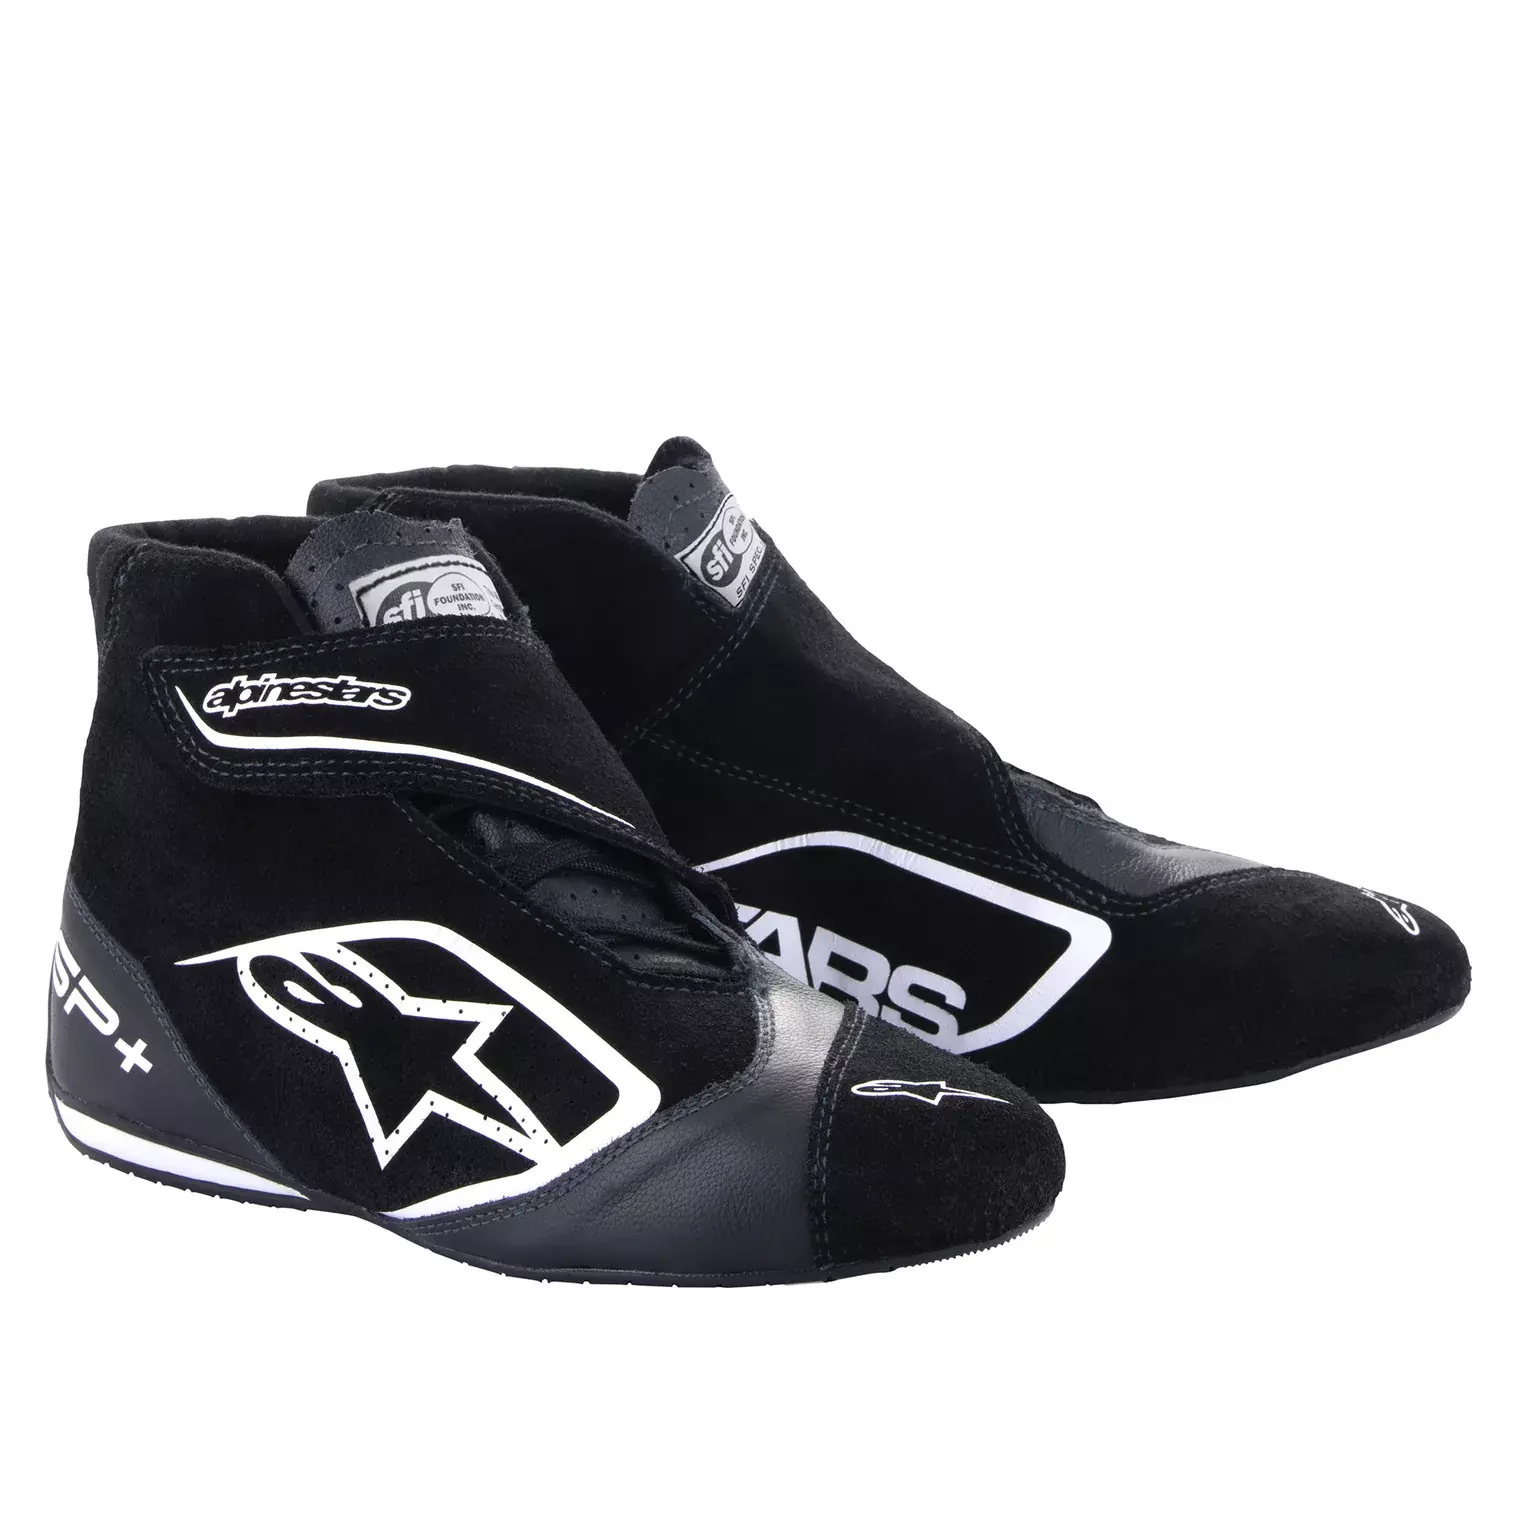 Alpinestars 2710823-12-9.5 Driving Shoe, SP+, Mid-Top, SFI 3.3, FIA Approved, Suede Outer, Nomex Inner, Black / White, Size 9.5, Pair